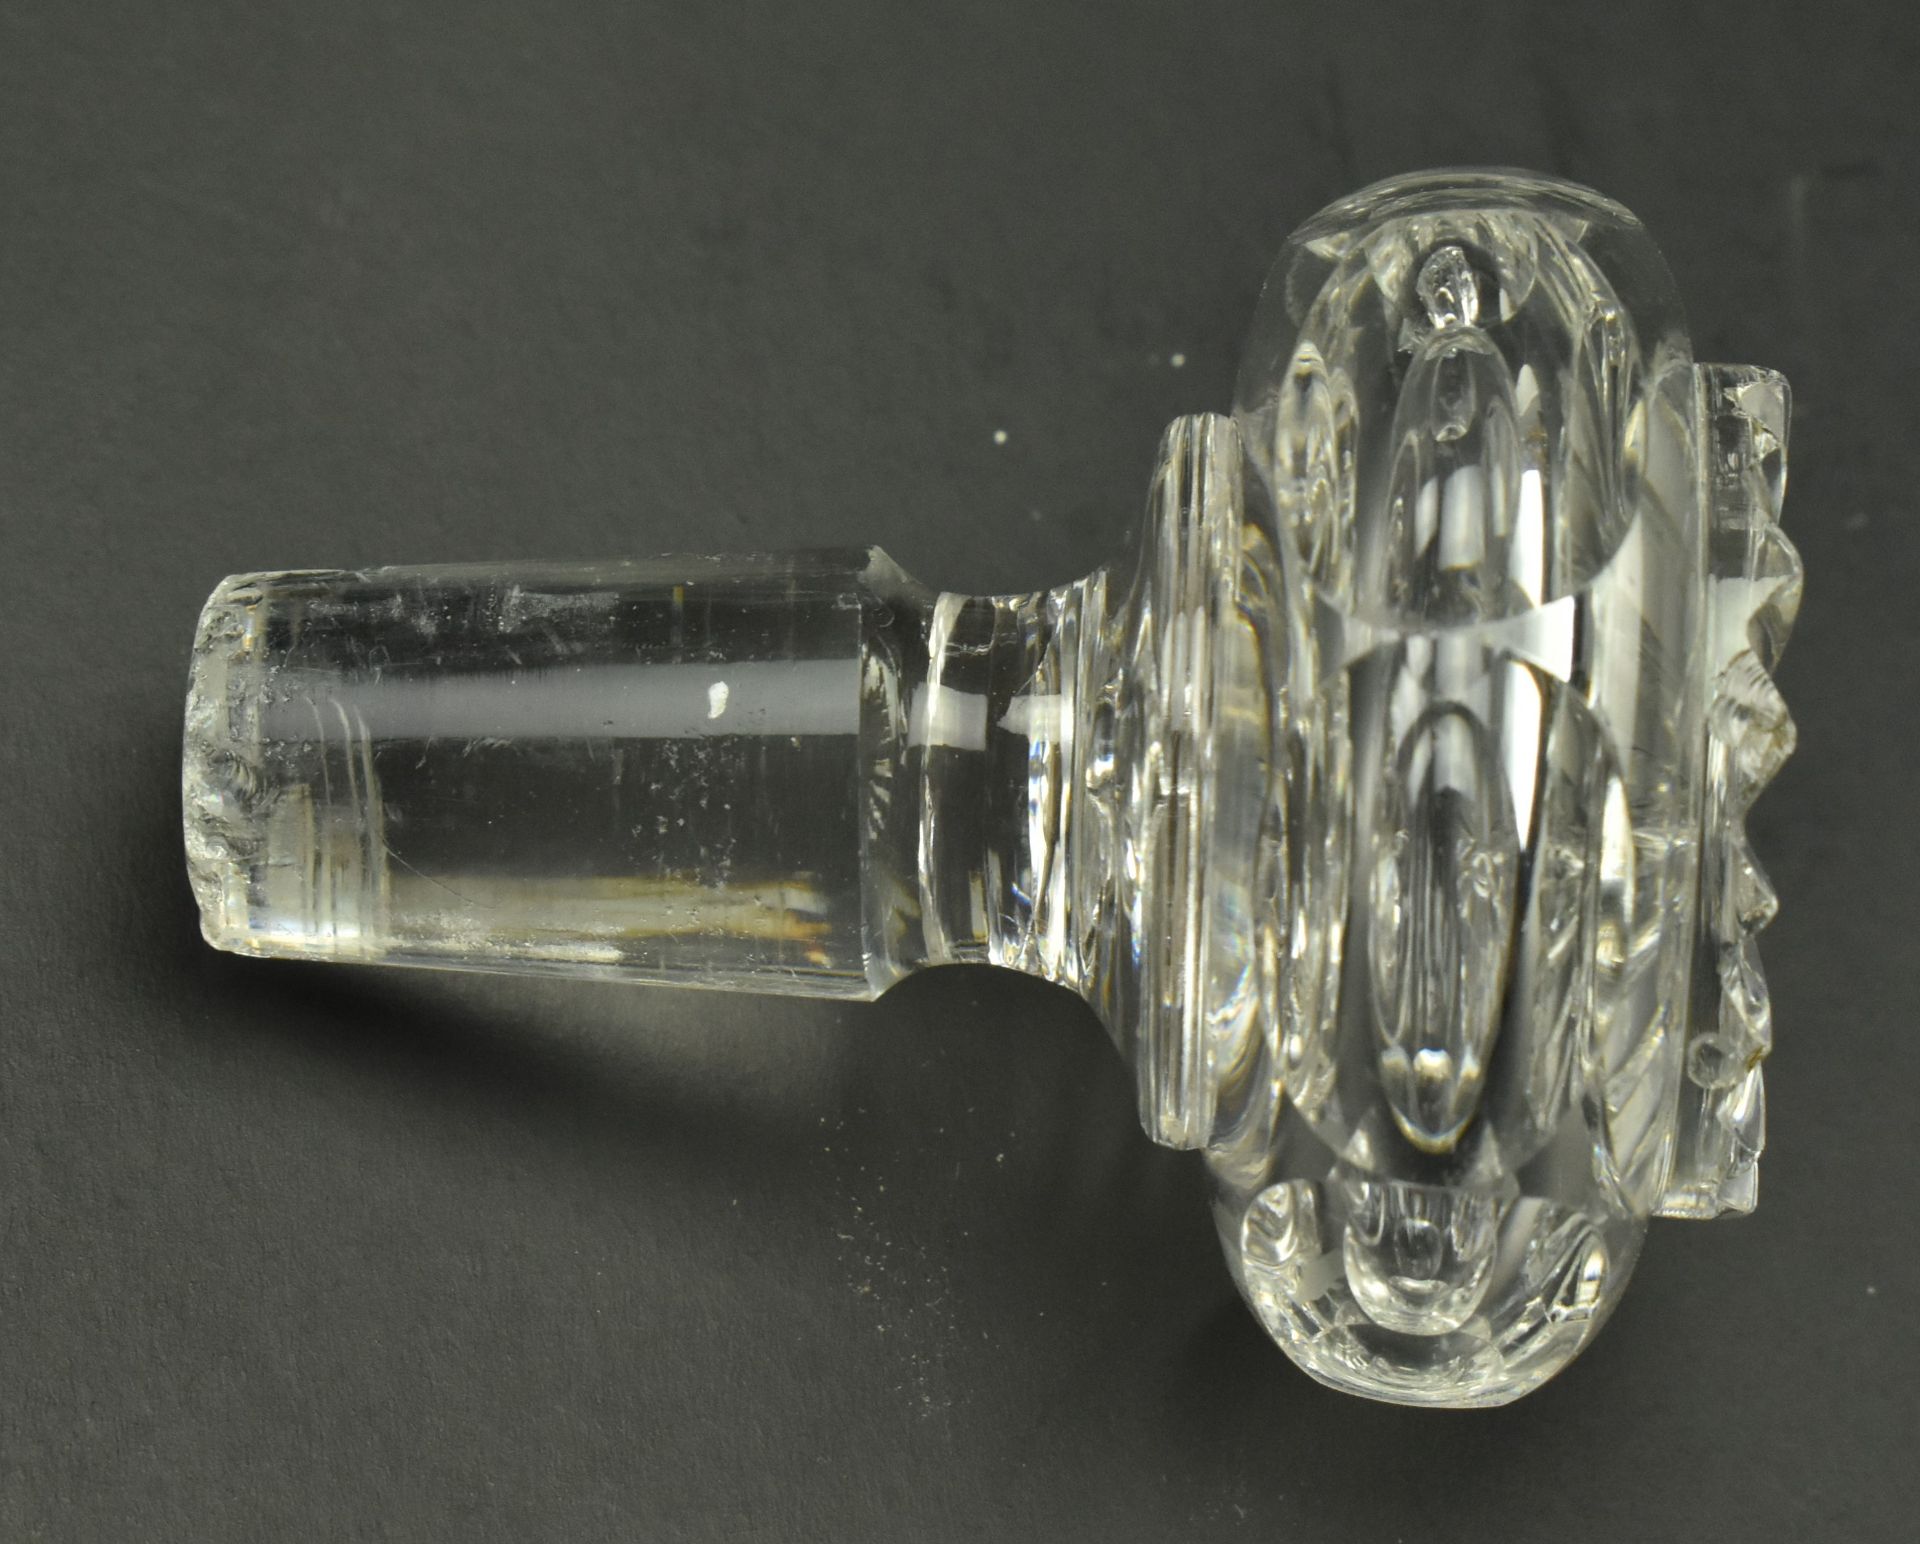 EARLY 19TH CENTURY HEAVY GLASS DECANTER, HOLLOW STOPPER - Image 4 of 8